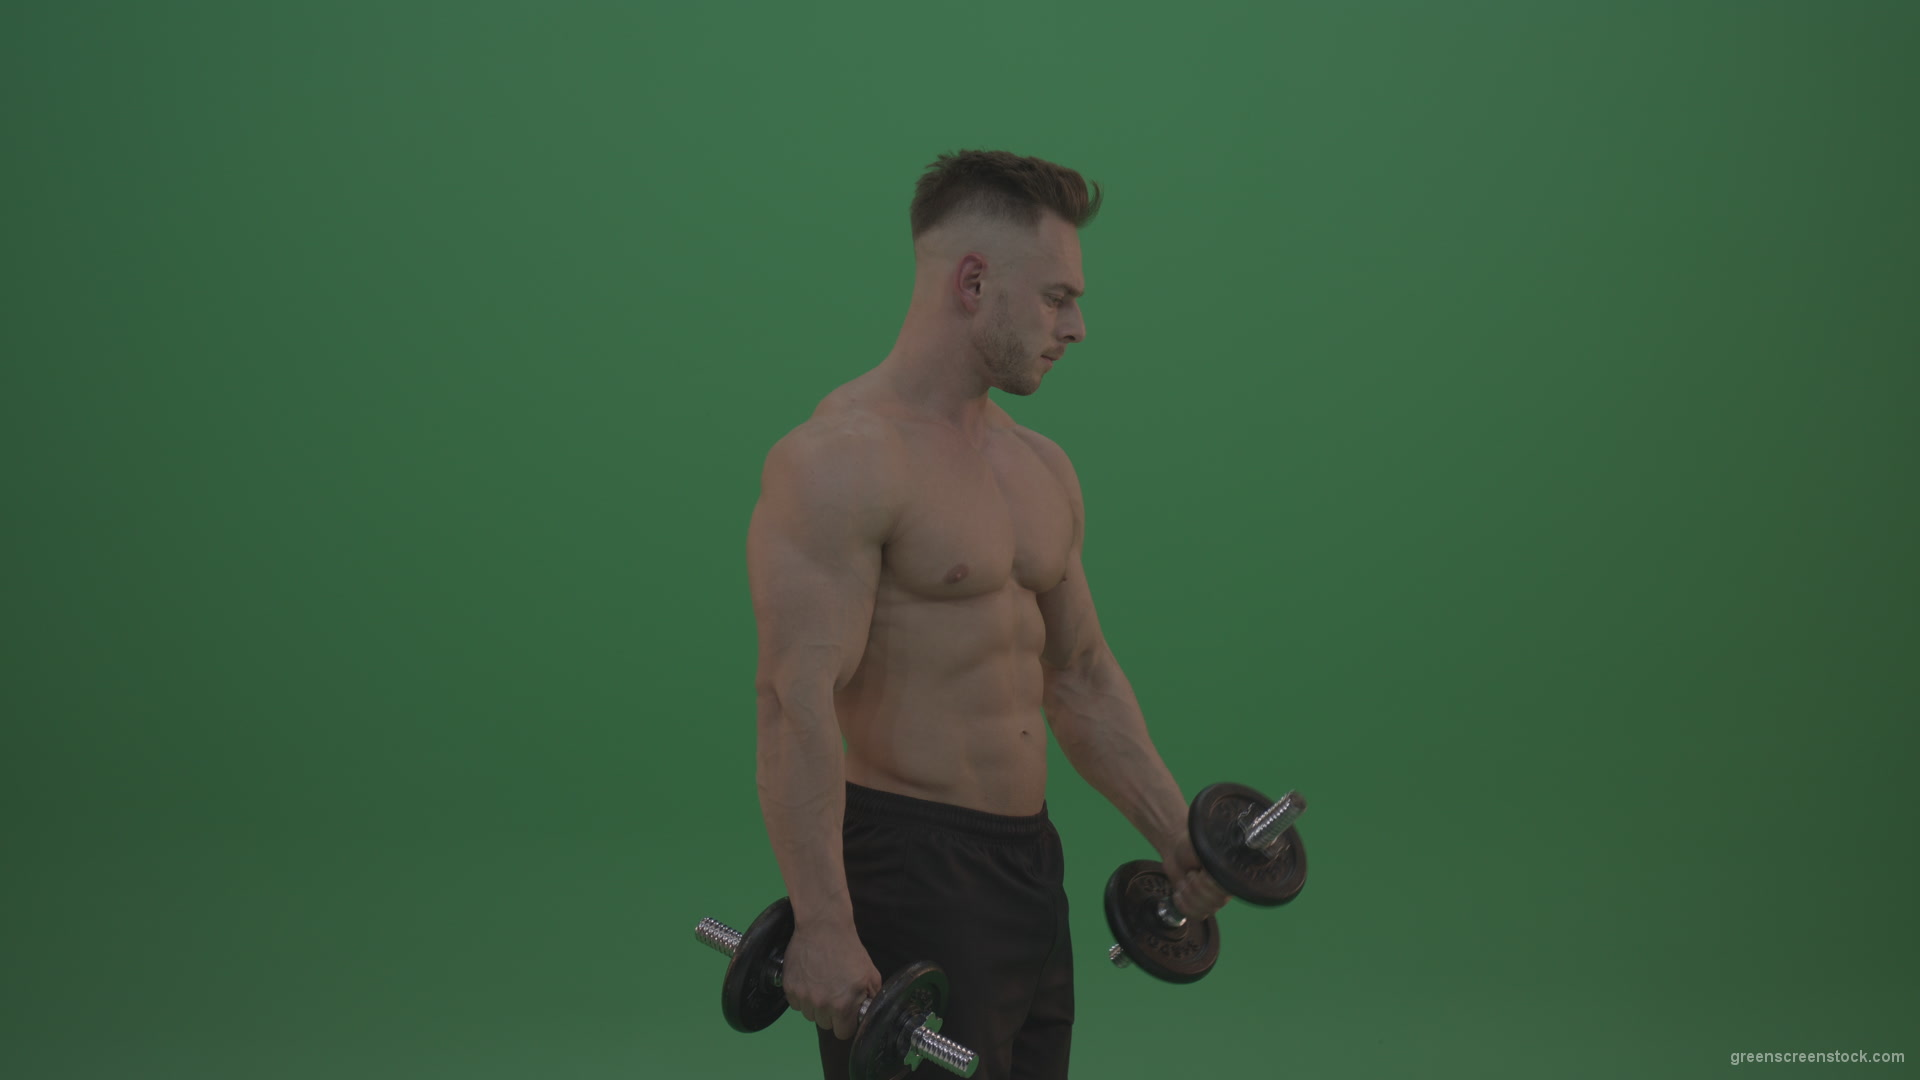 Young_Bodybuilder_Working_Out_Two_Handed_Dumbbell_Push_Ups_Excercise_On_Green_Screen_Wall_Background_009 Green Screen Stock